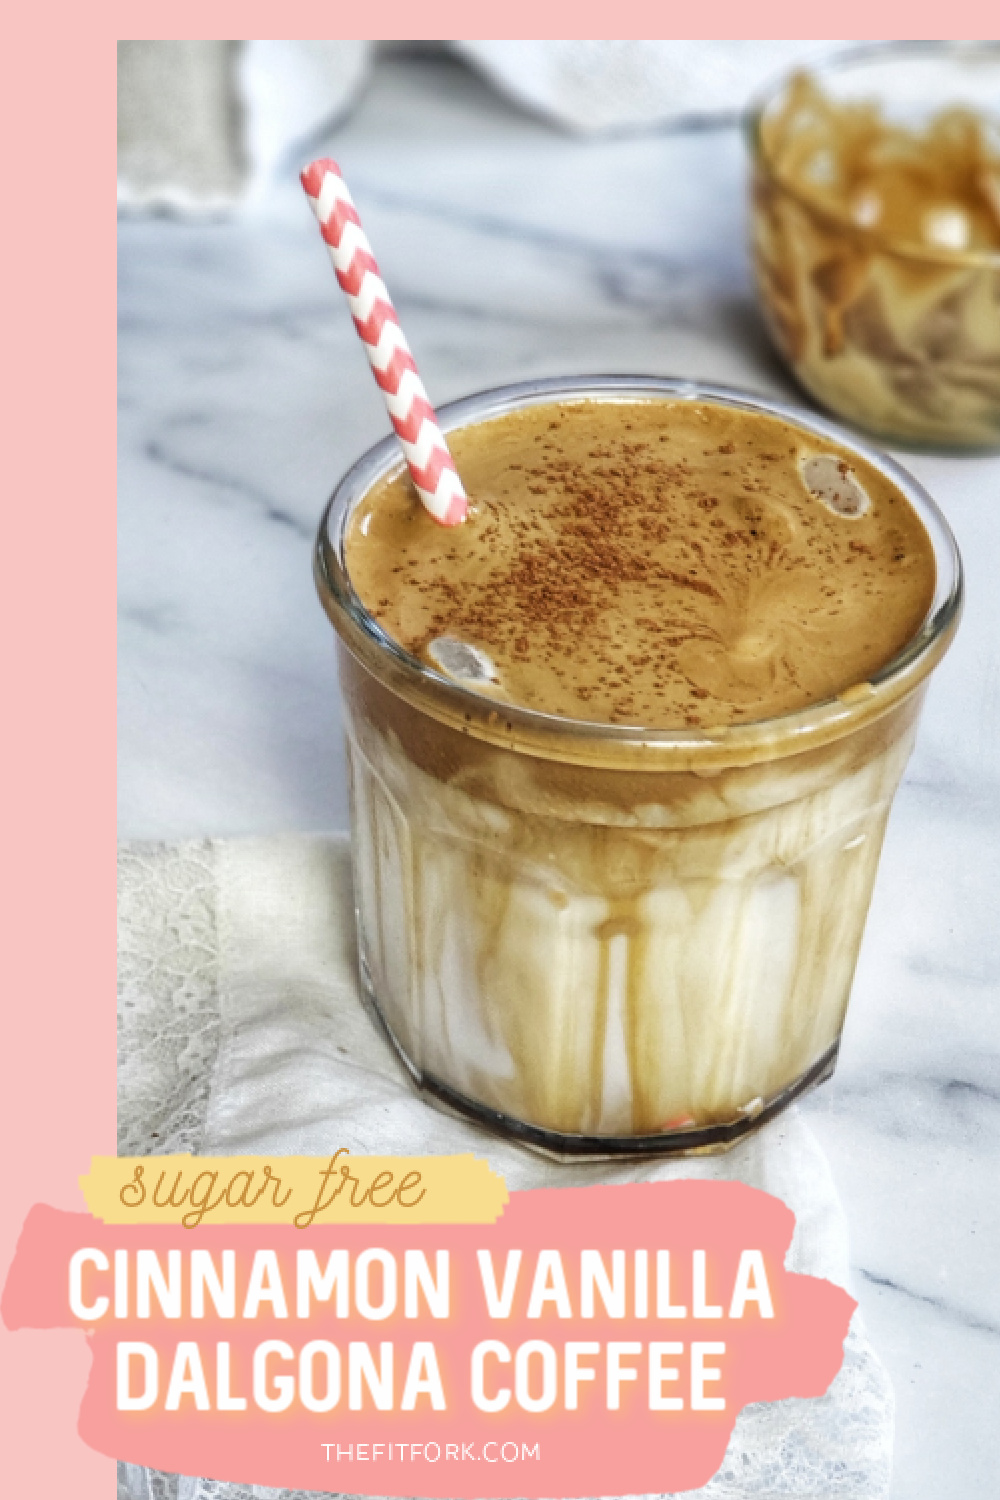 Dalgona (Whipped) Coffee is so creamy and delicious, and my version has hints of vanilla and cinnamon -- plus it's free of traditional sugar, so it's great for low carb diets. This iced coffee drink has only 38 calories per serving and packs a caffeine punch, made with espresso powder. Visit thefitfork.com for more low carb and clean eating recipes.